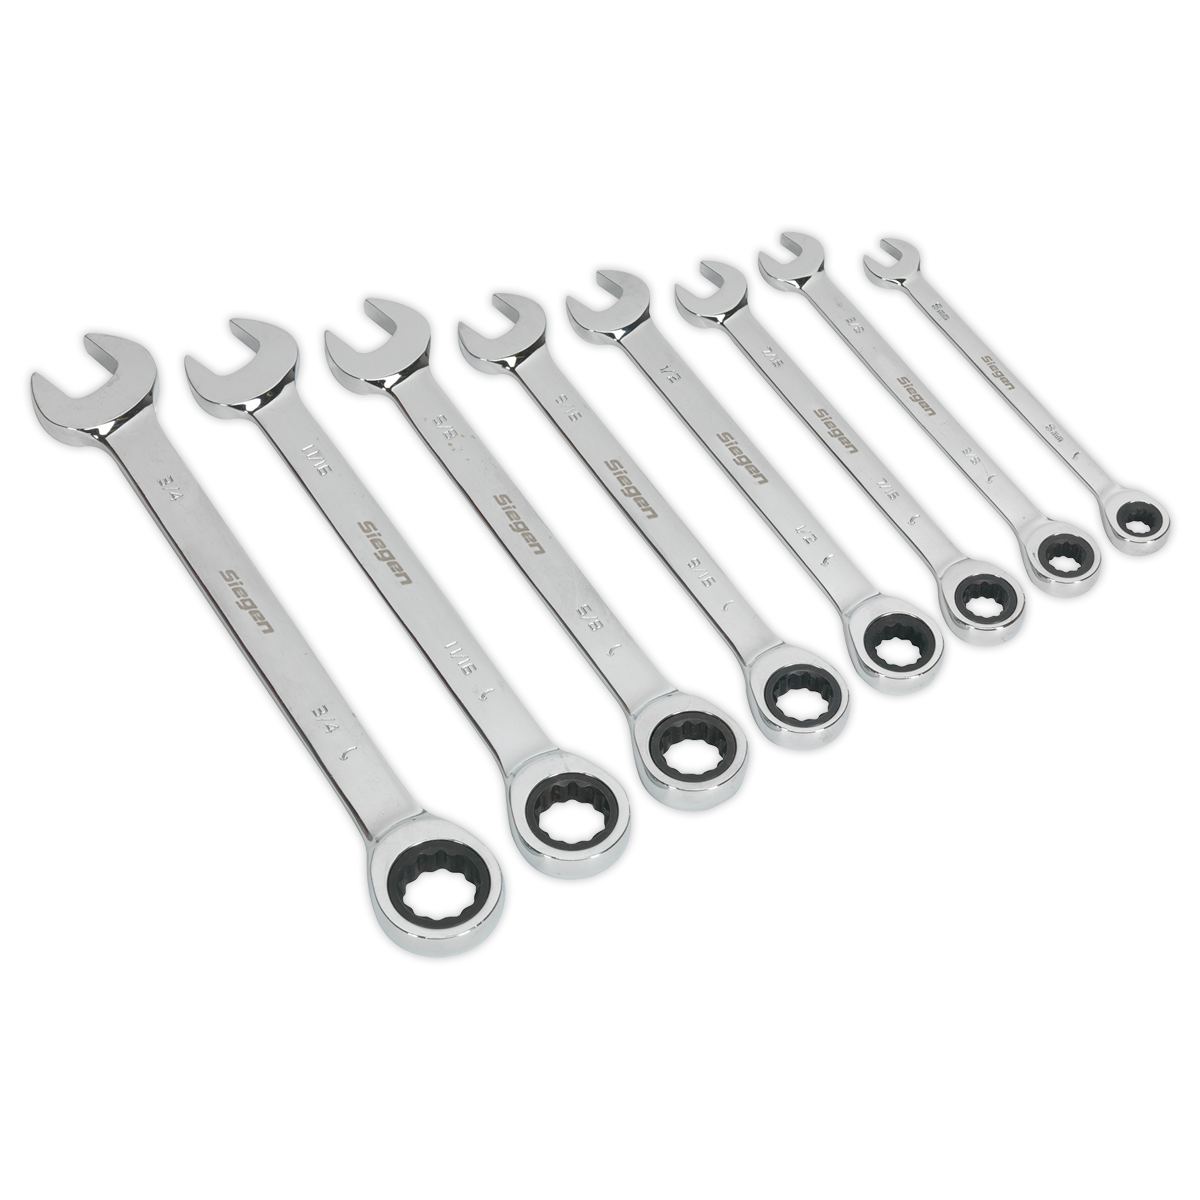 Sealey Combination Ratchet Spanner Set 8pc Imperial